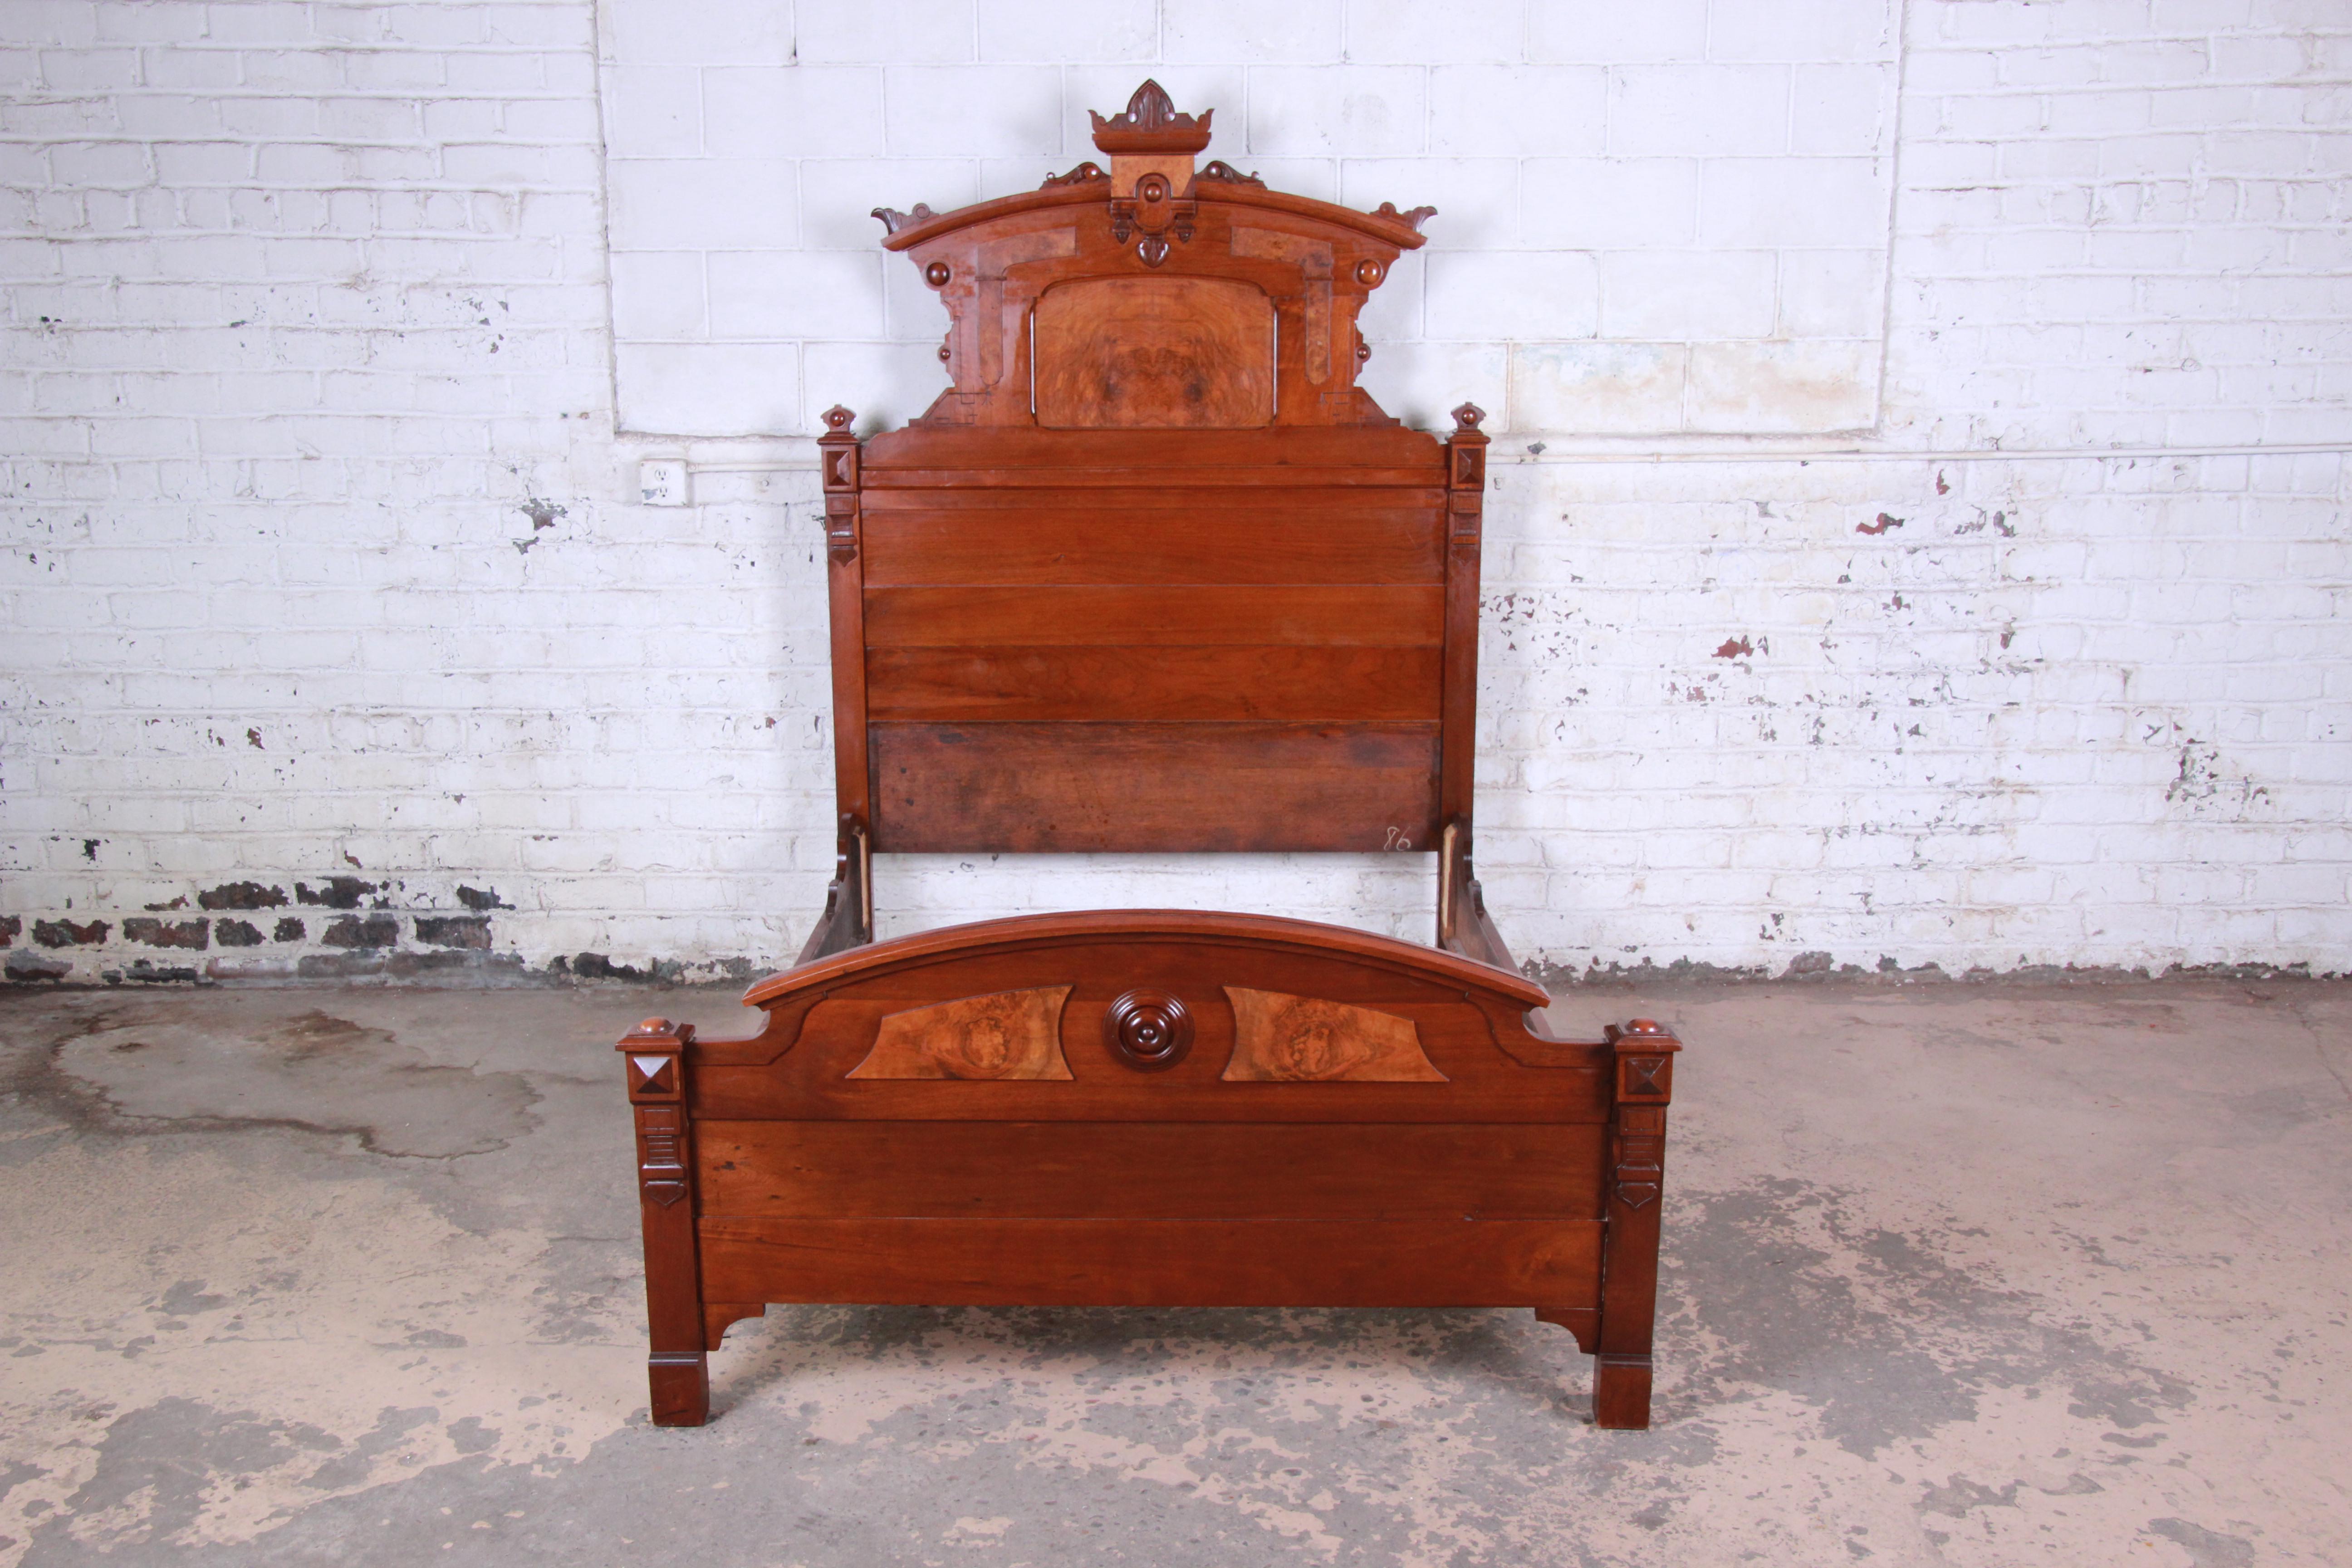 An outstanding 19th century Victorian Eastlake carved walnut and burl wood full size bed. The bed features stunning wood grain and beautiful carved wood details. It is solid, sturdy, and fully functional. An impressive statement piece, with a nearly